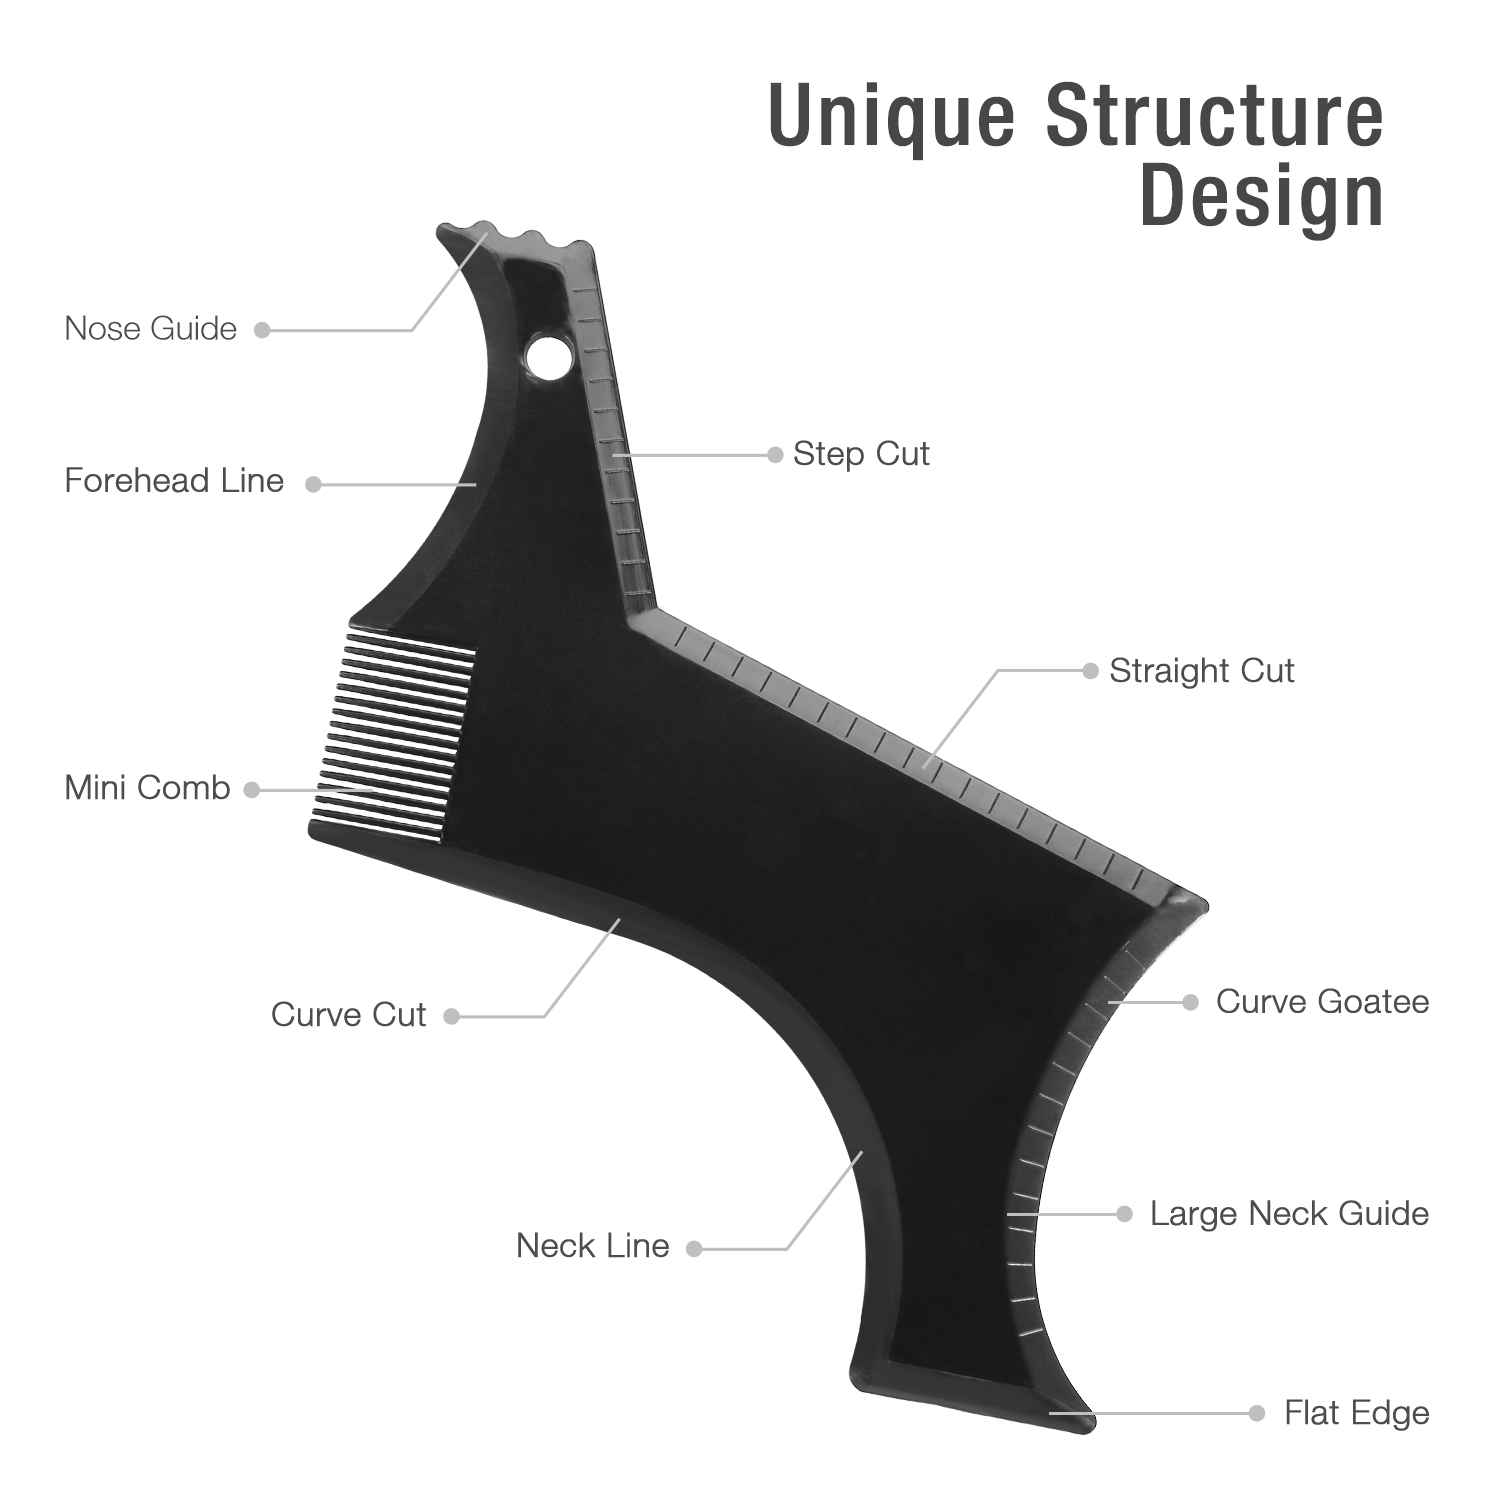 housmile-beard-shaping-template-all-in-one-beard-styling-tool-for-men